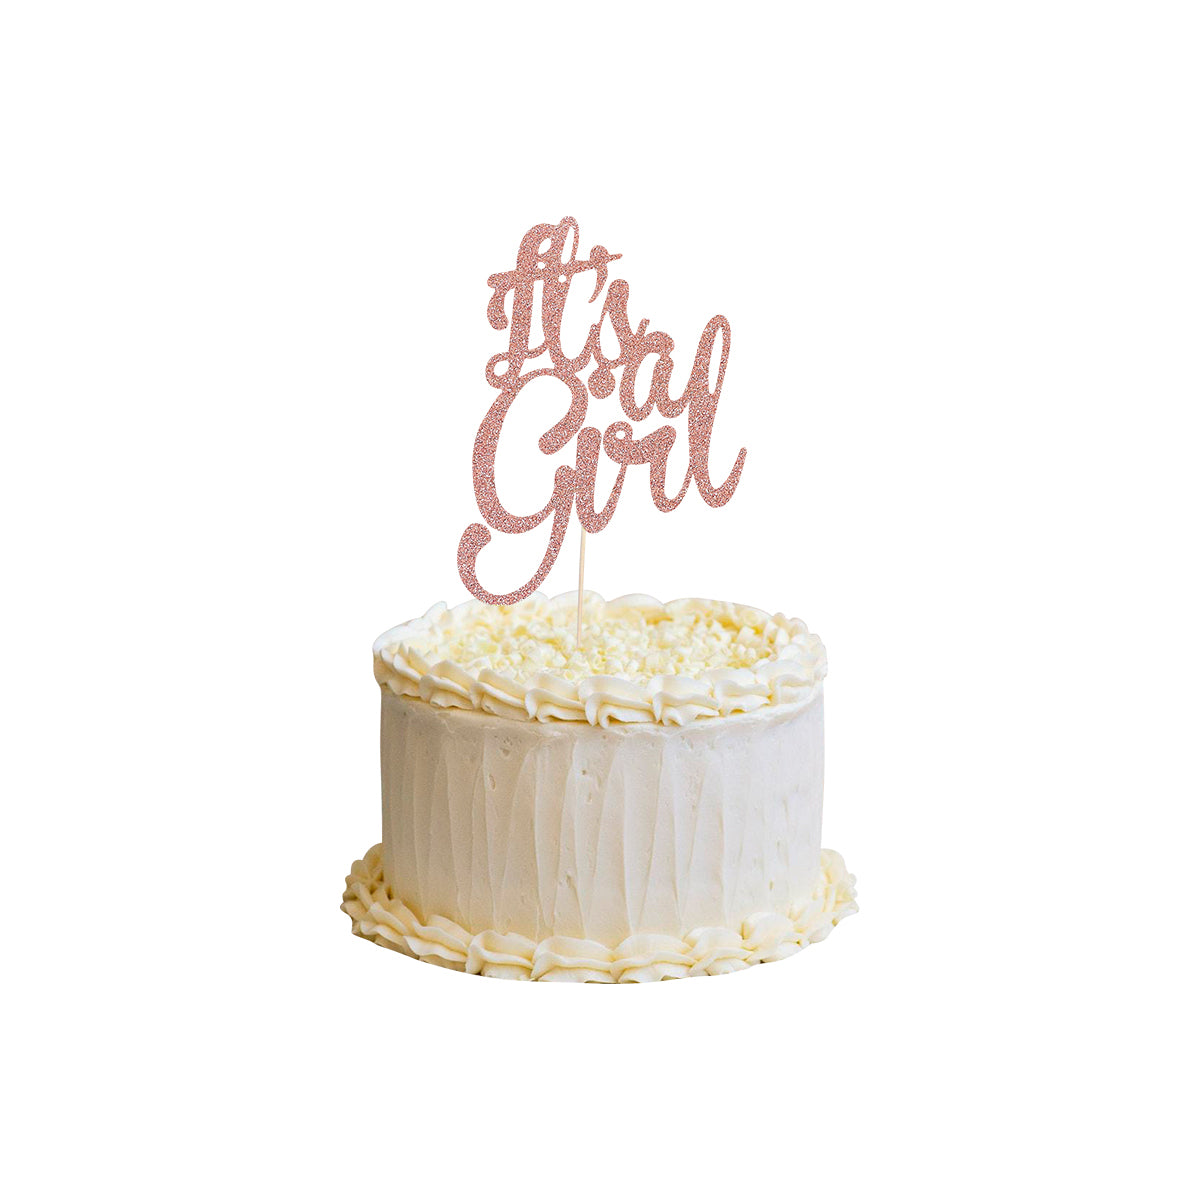 "Its A Girl" Scripted Rose Gold Cake Topper